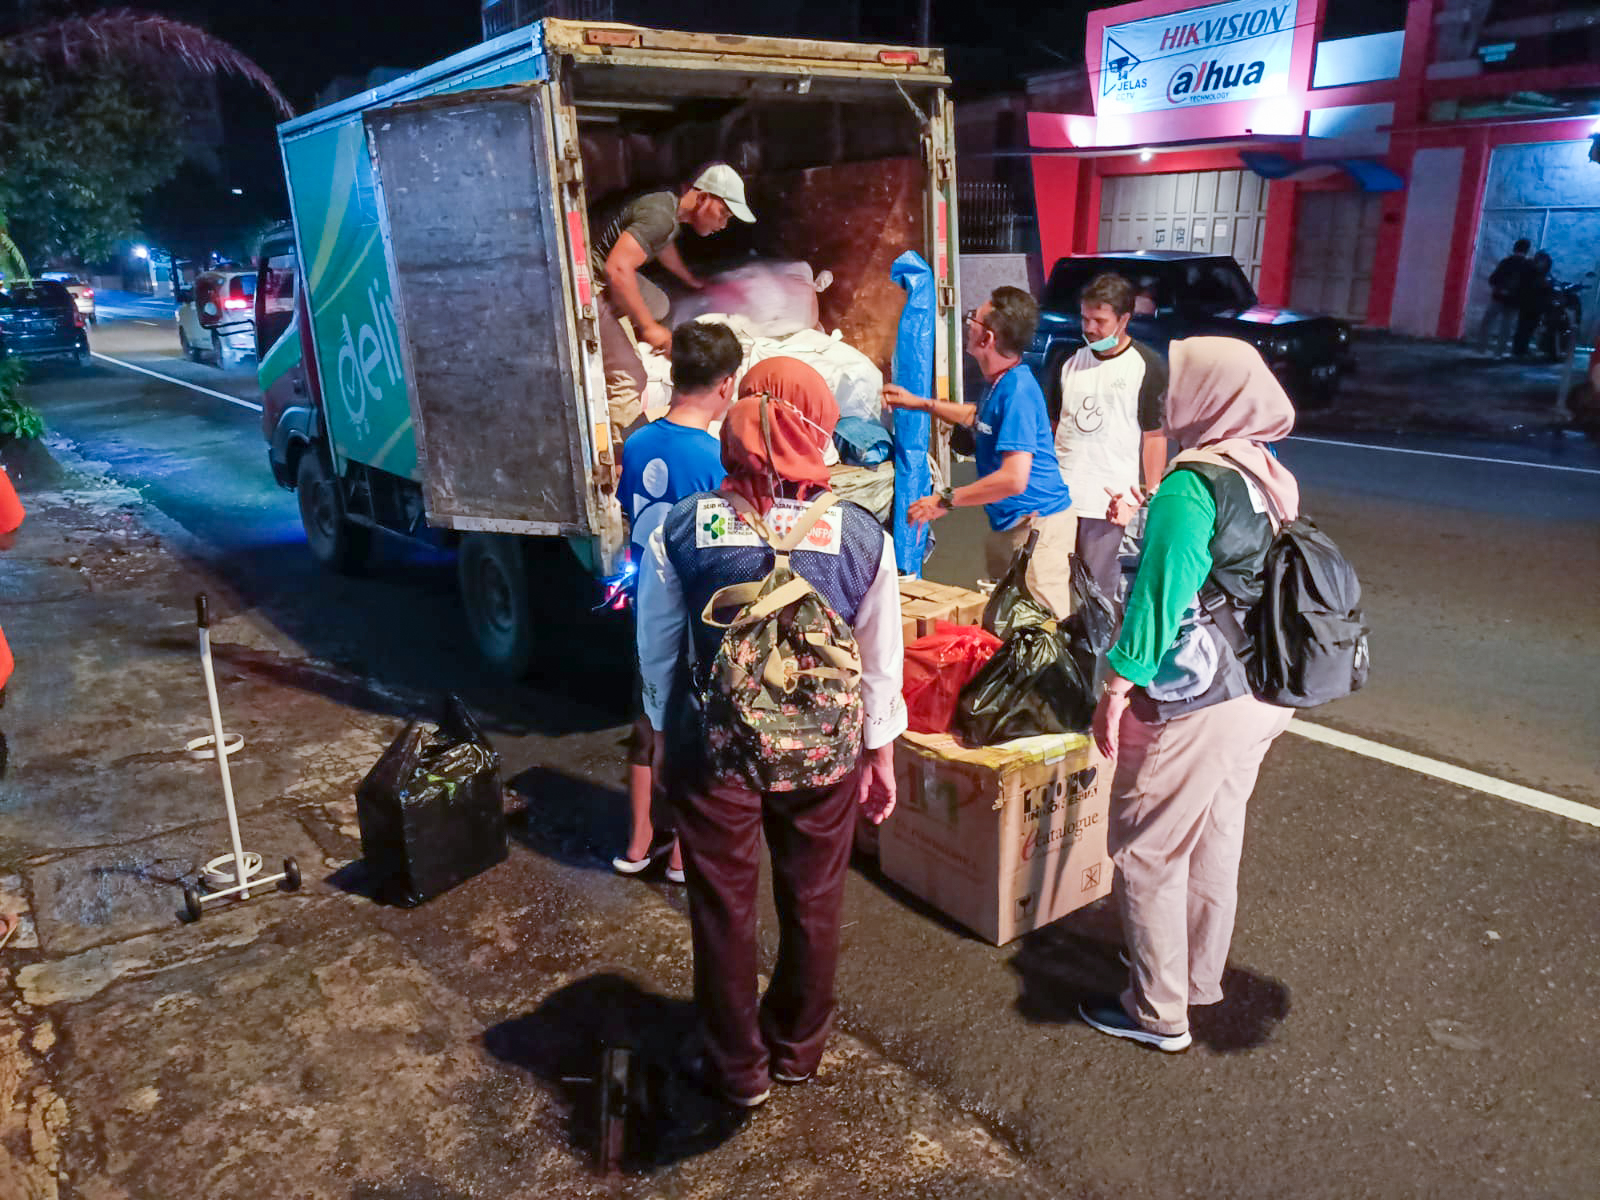 Two Americares staff members in blue t-shirts work with four other people (one inside van) unloading supplies from a box van.